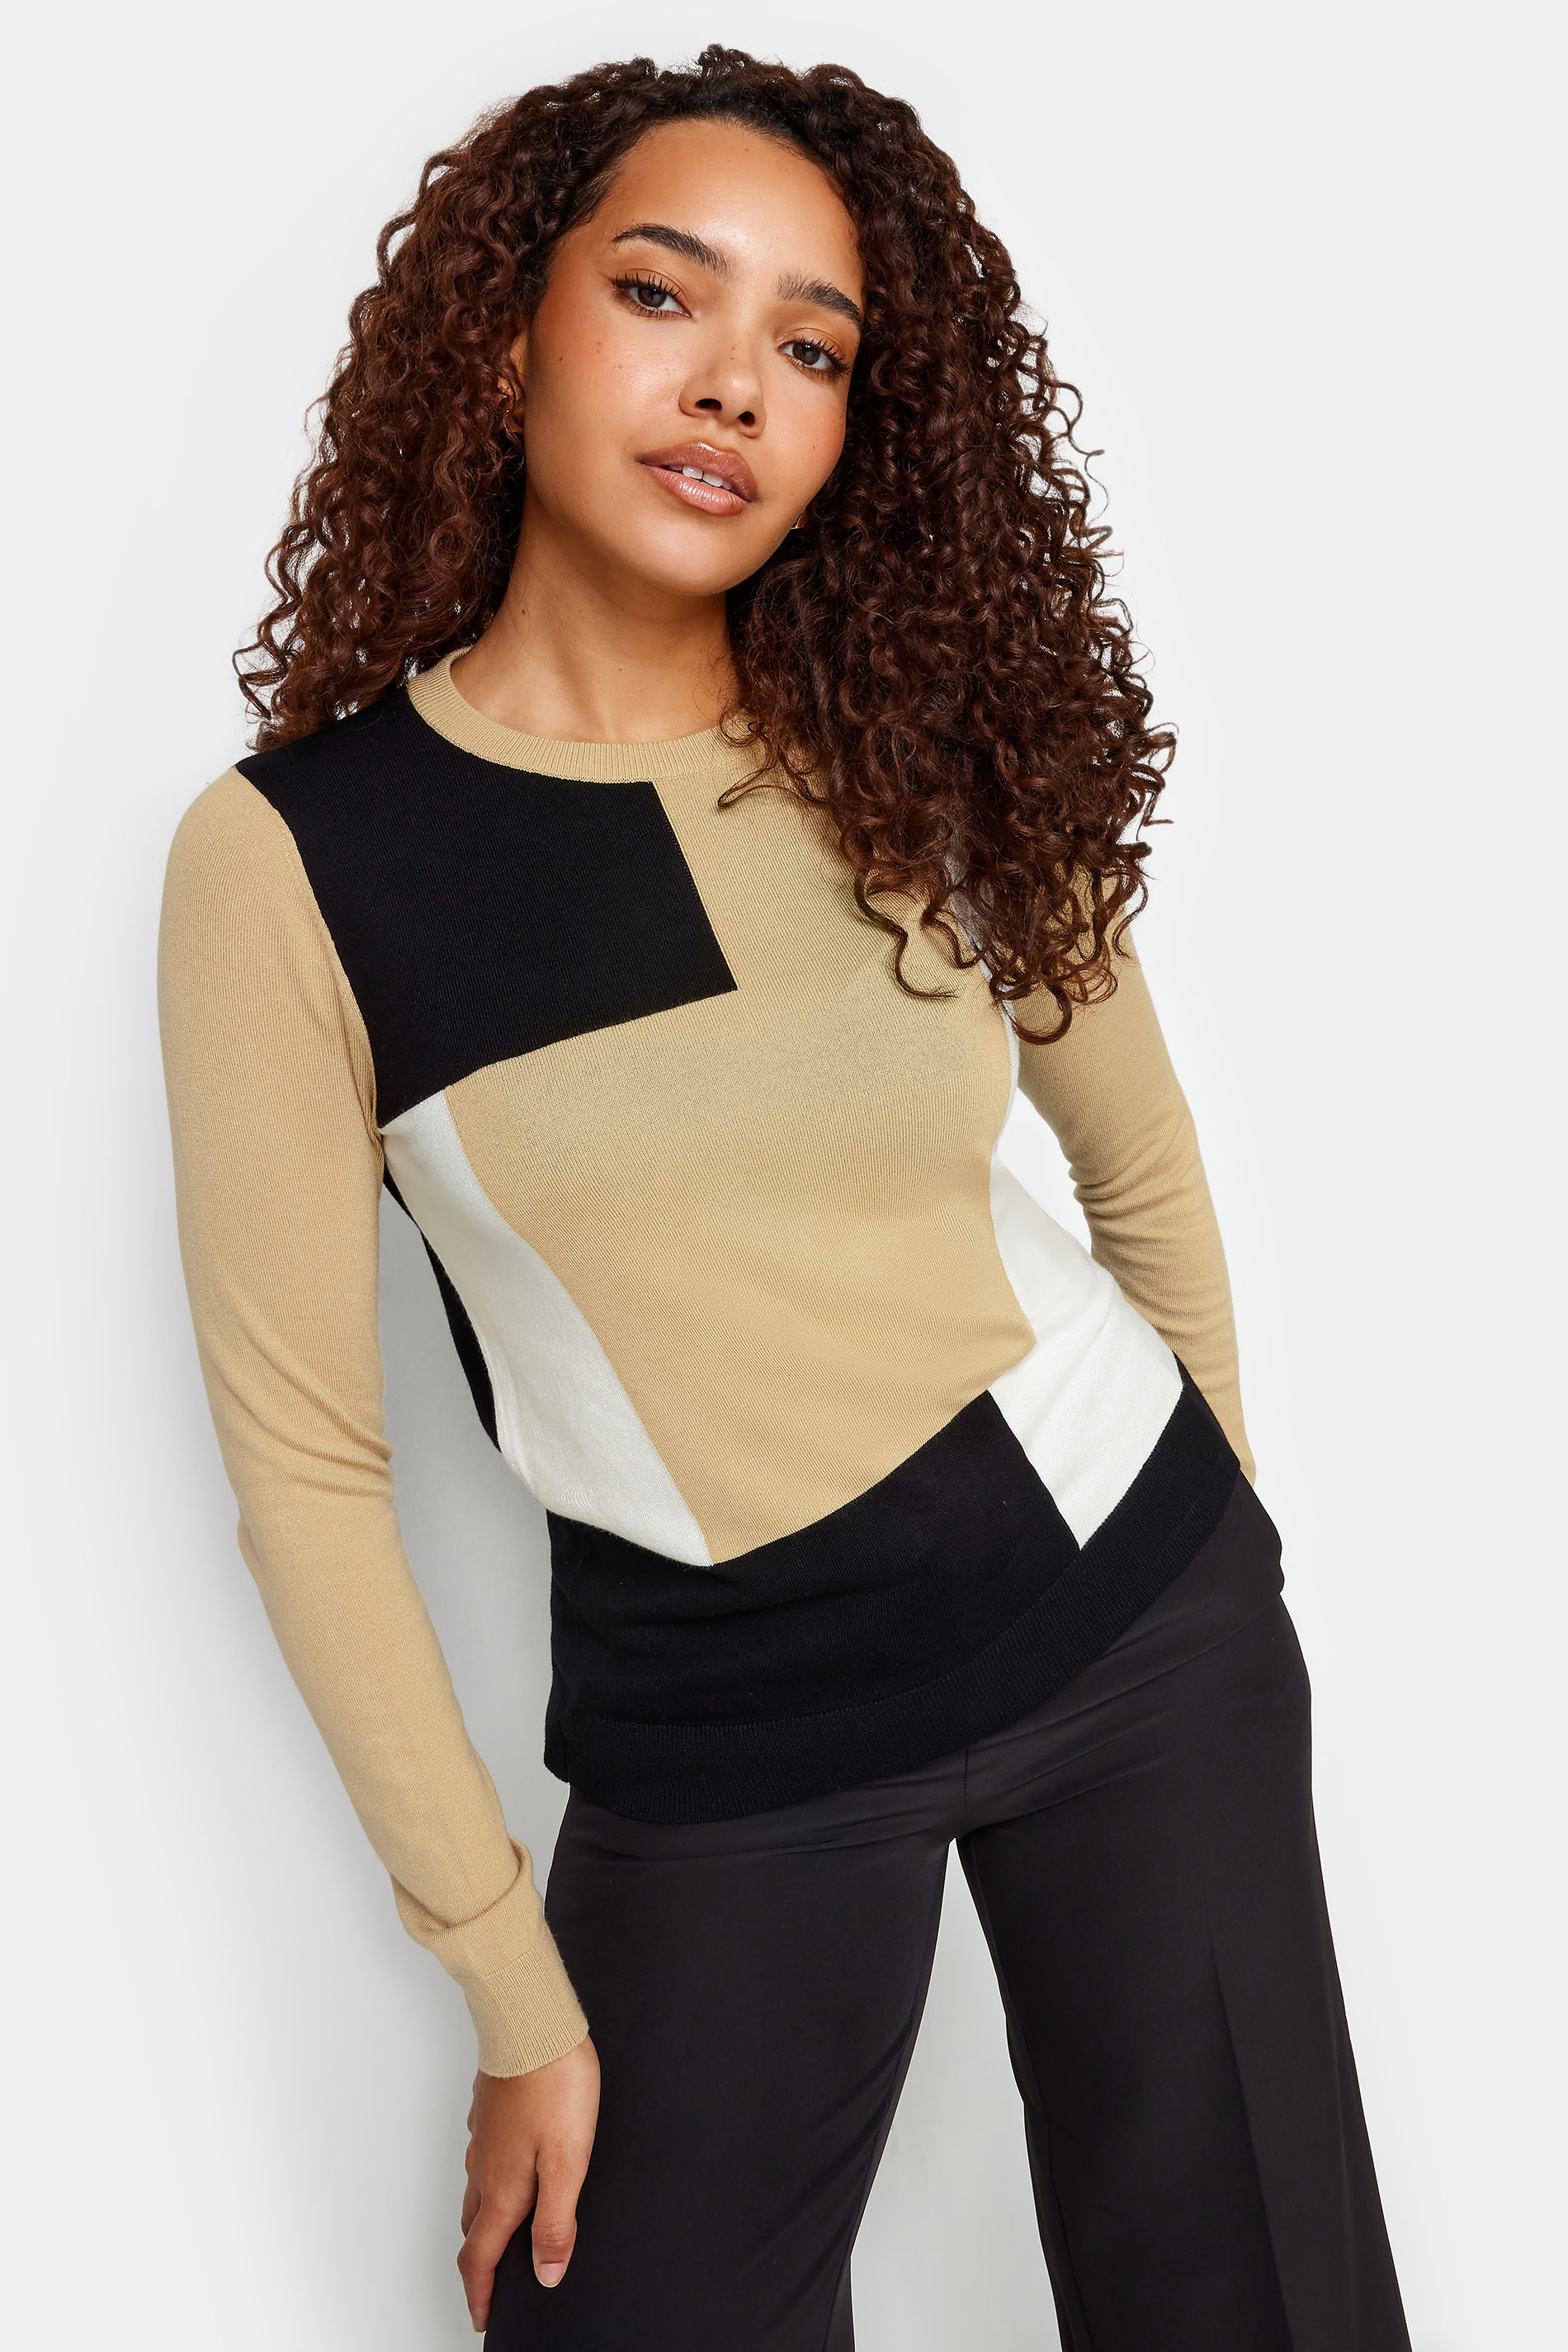 M&Co Neutral Brown Colourblock Knitted Jumper | M&Co 1